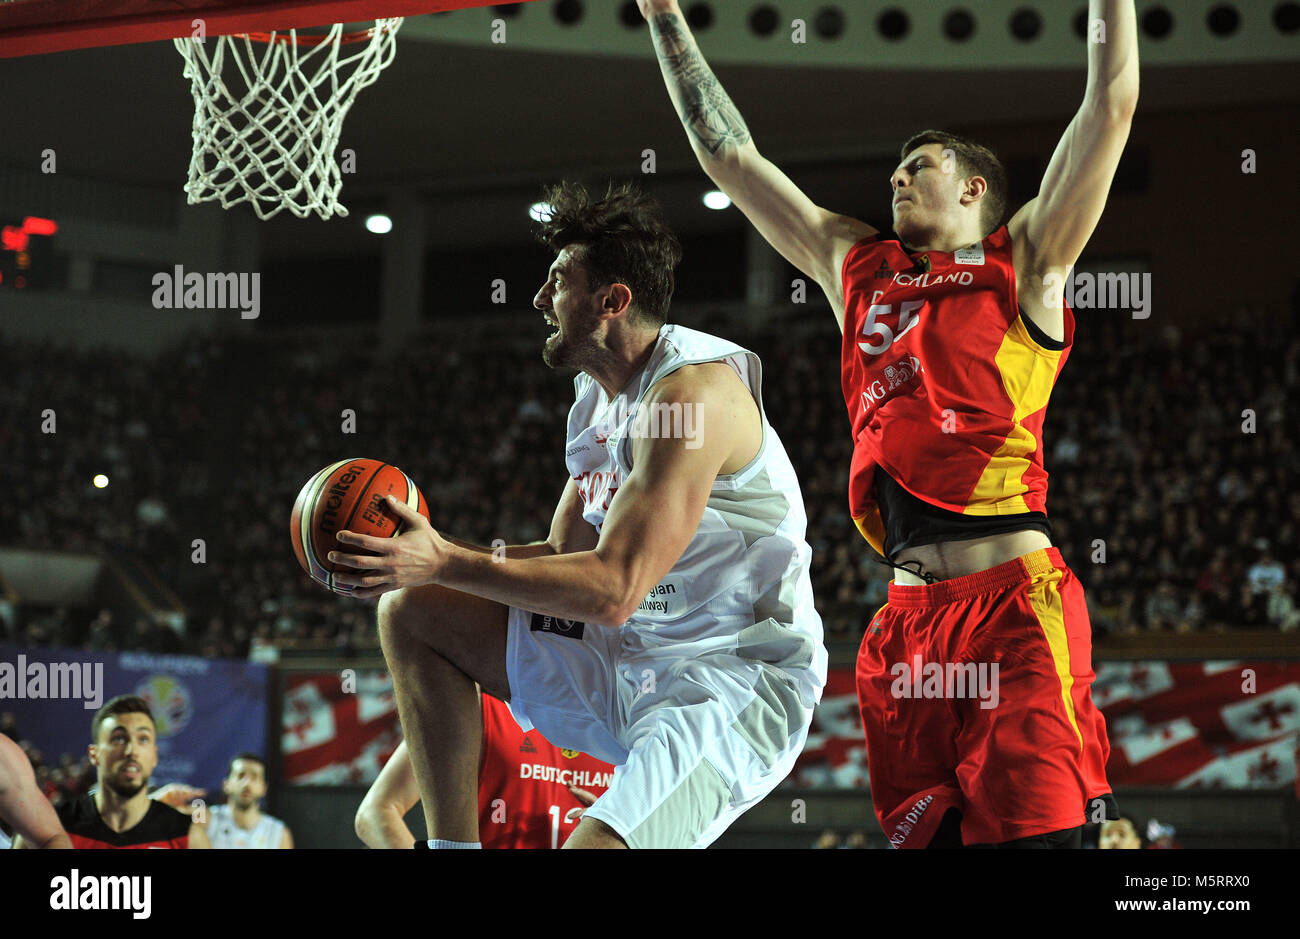 (180226)-- TBILISI, Feb 26, 2018 (Xinhua) -- Georgia's N.Tskitishvili (L) goes to the basket under the defense of Germany's I. Hartenstein during the match of the FIBA Basketball World Cup 2019 European qualifier in Tbilisi, Georgia, on Feb 25, 2018. Germany won 87-77. (Xinhua/Kulumbegashvili Tamuna) Stock Photo